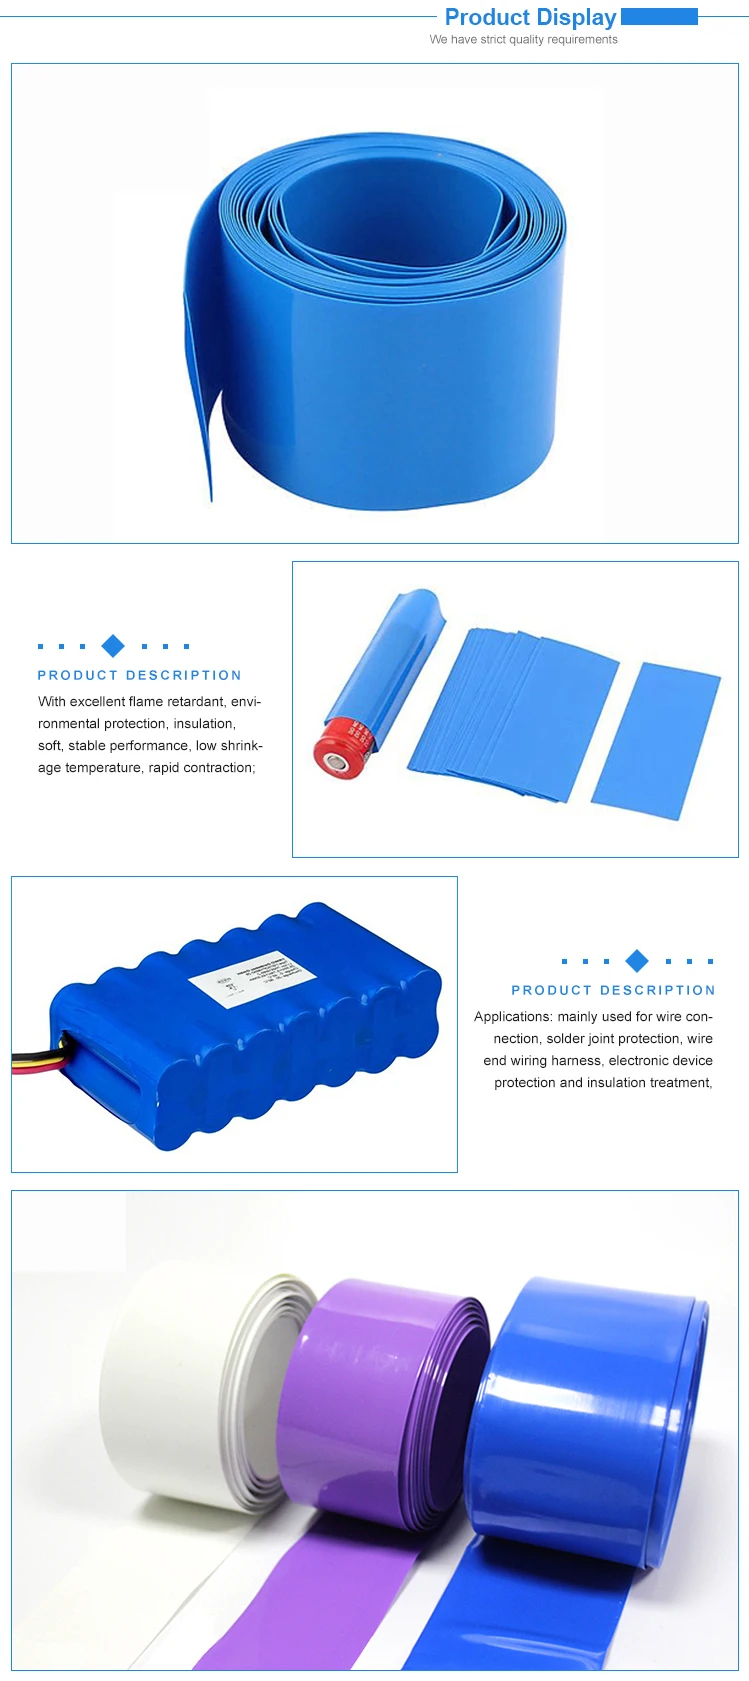 High Ratio Adhesive Insulated Double Wall Heat Shrink TubeHow To Use